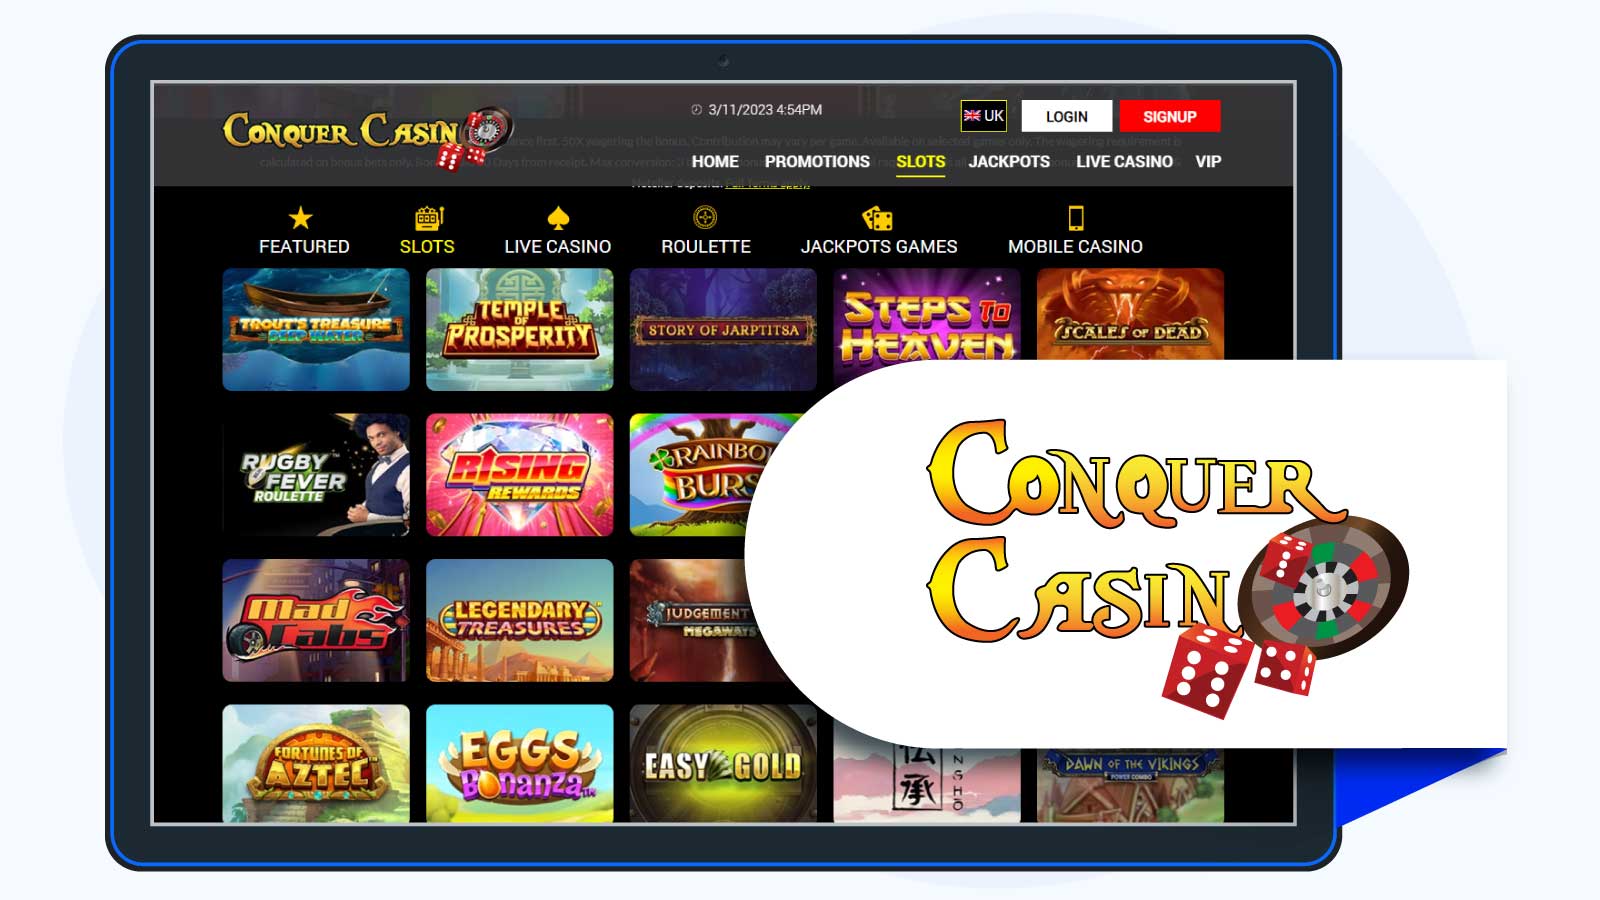 ConquerCasino 200% Up To £50 + 15 Free Spins on Book of Dead